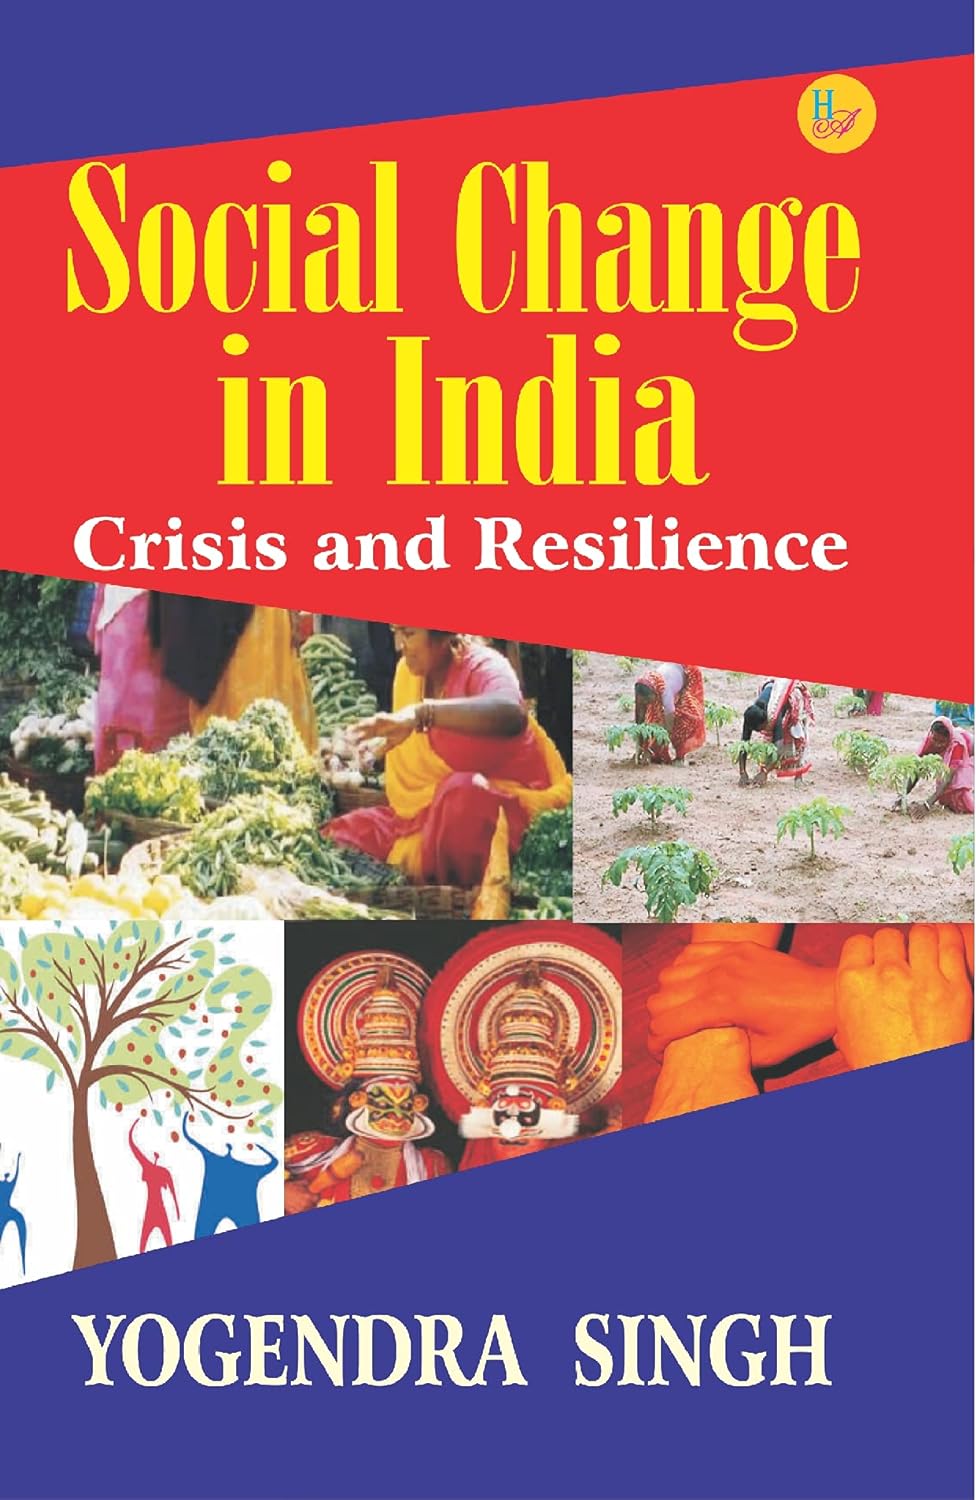 Social Change in India: Crisis and Resilience